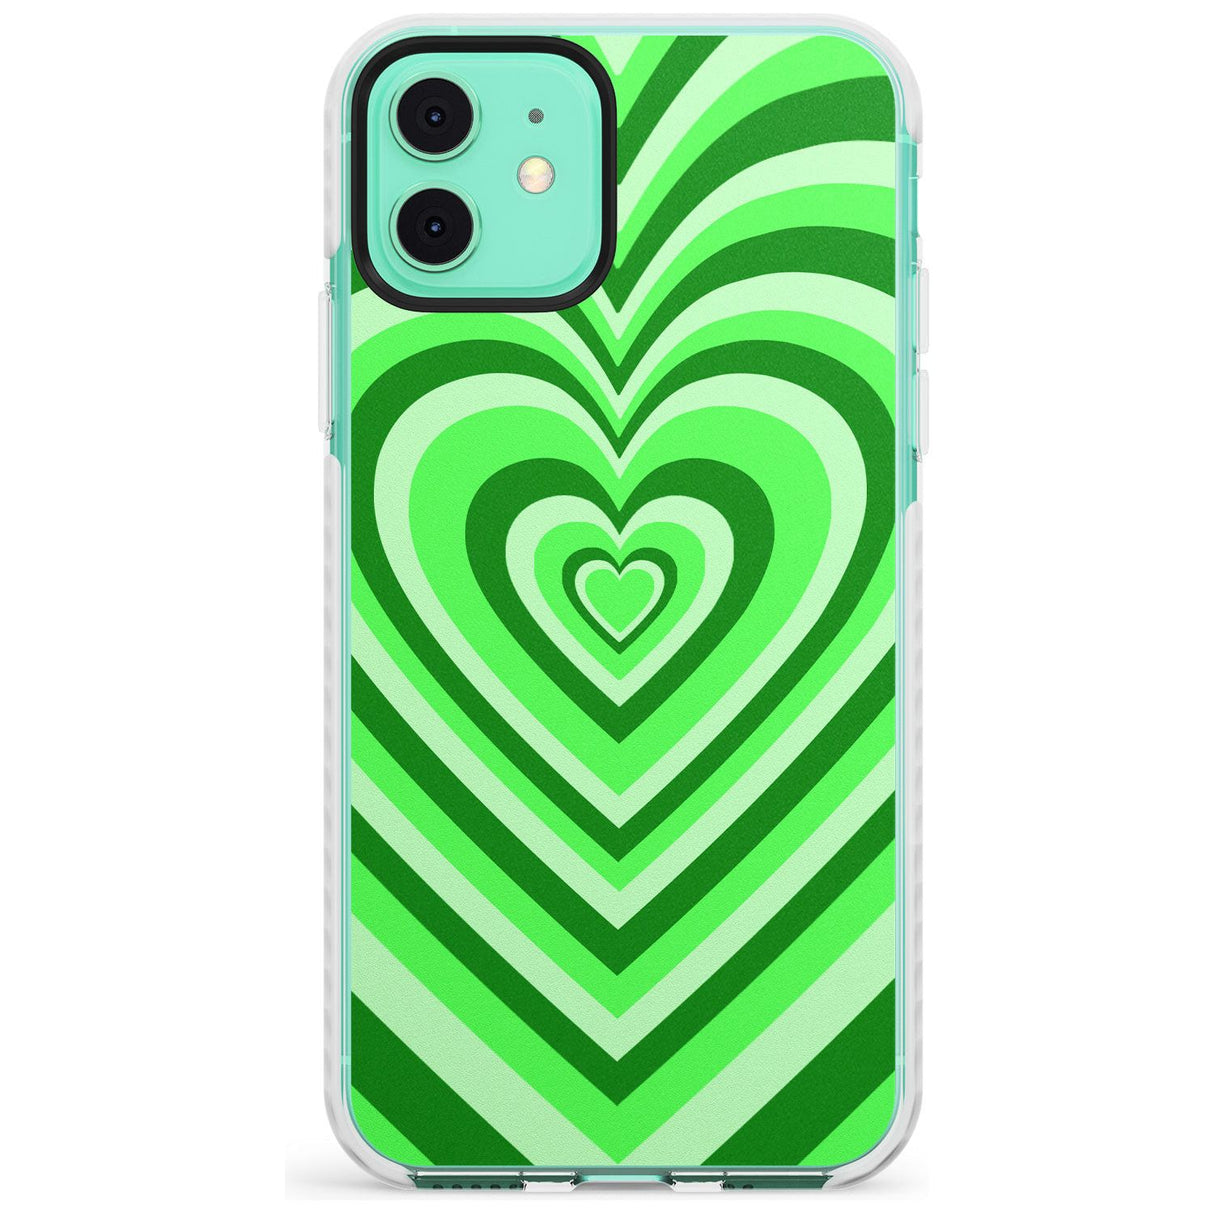 Green Heart Illusion Impact Phone Case for iPhone 11